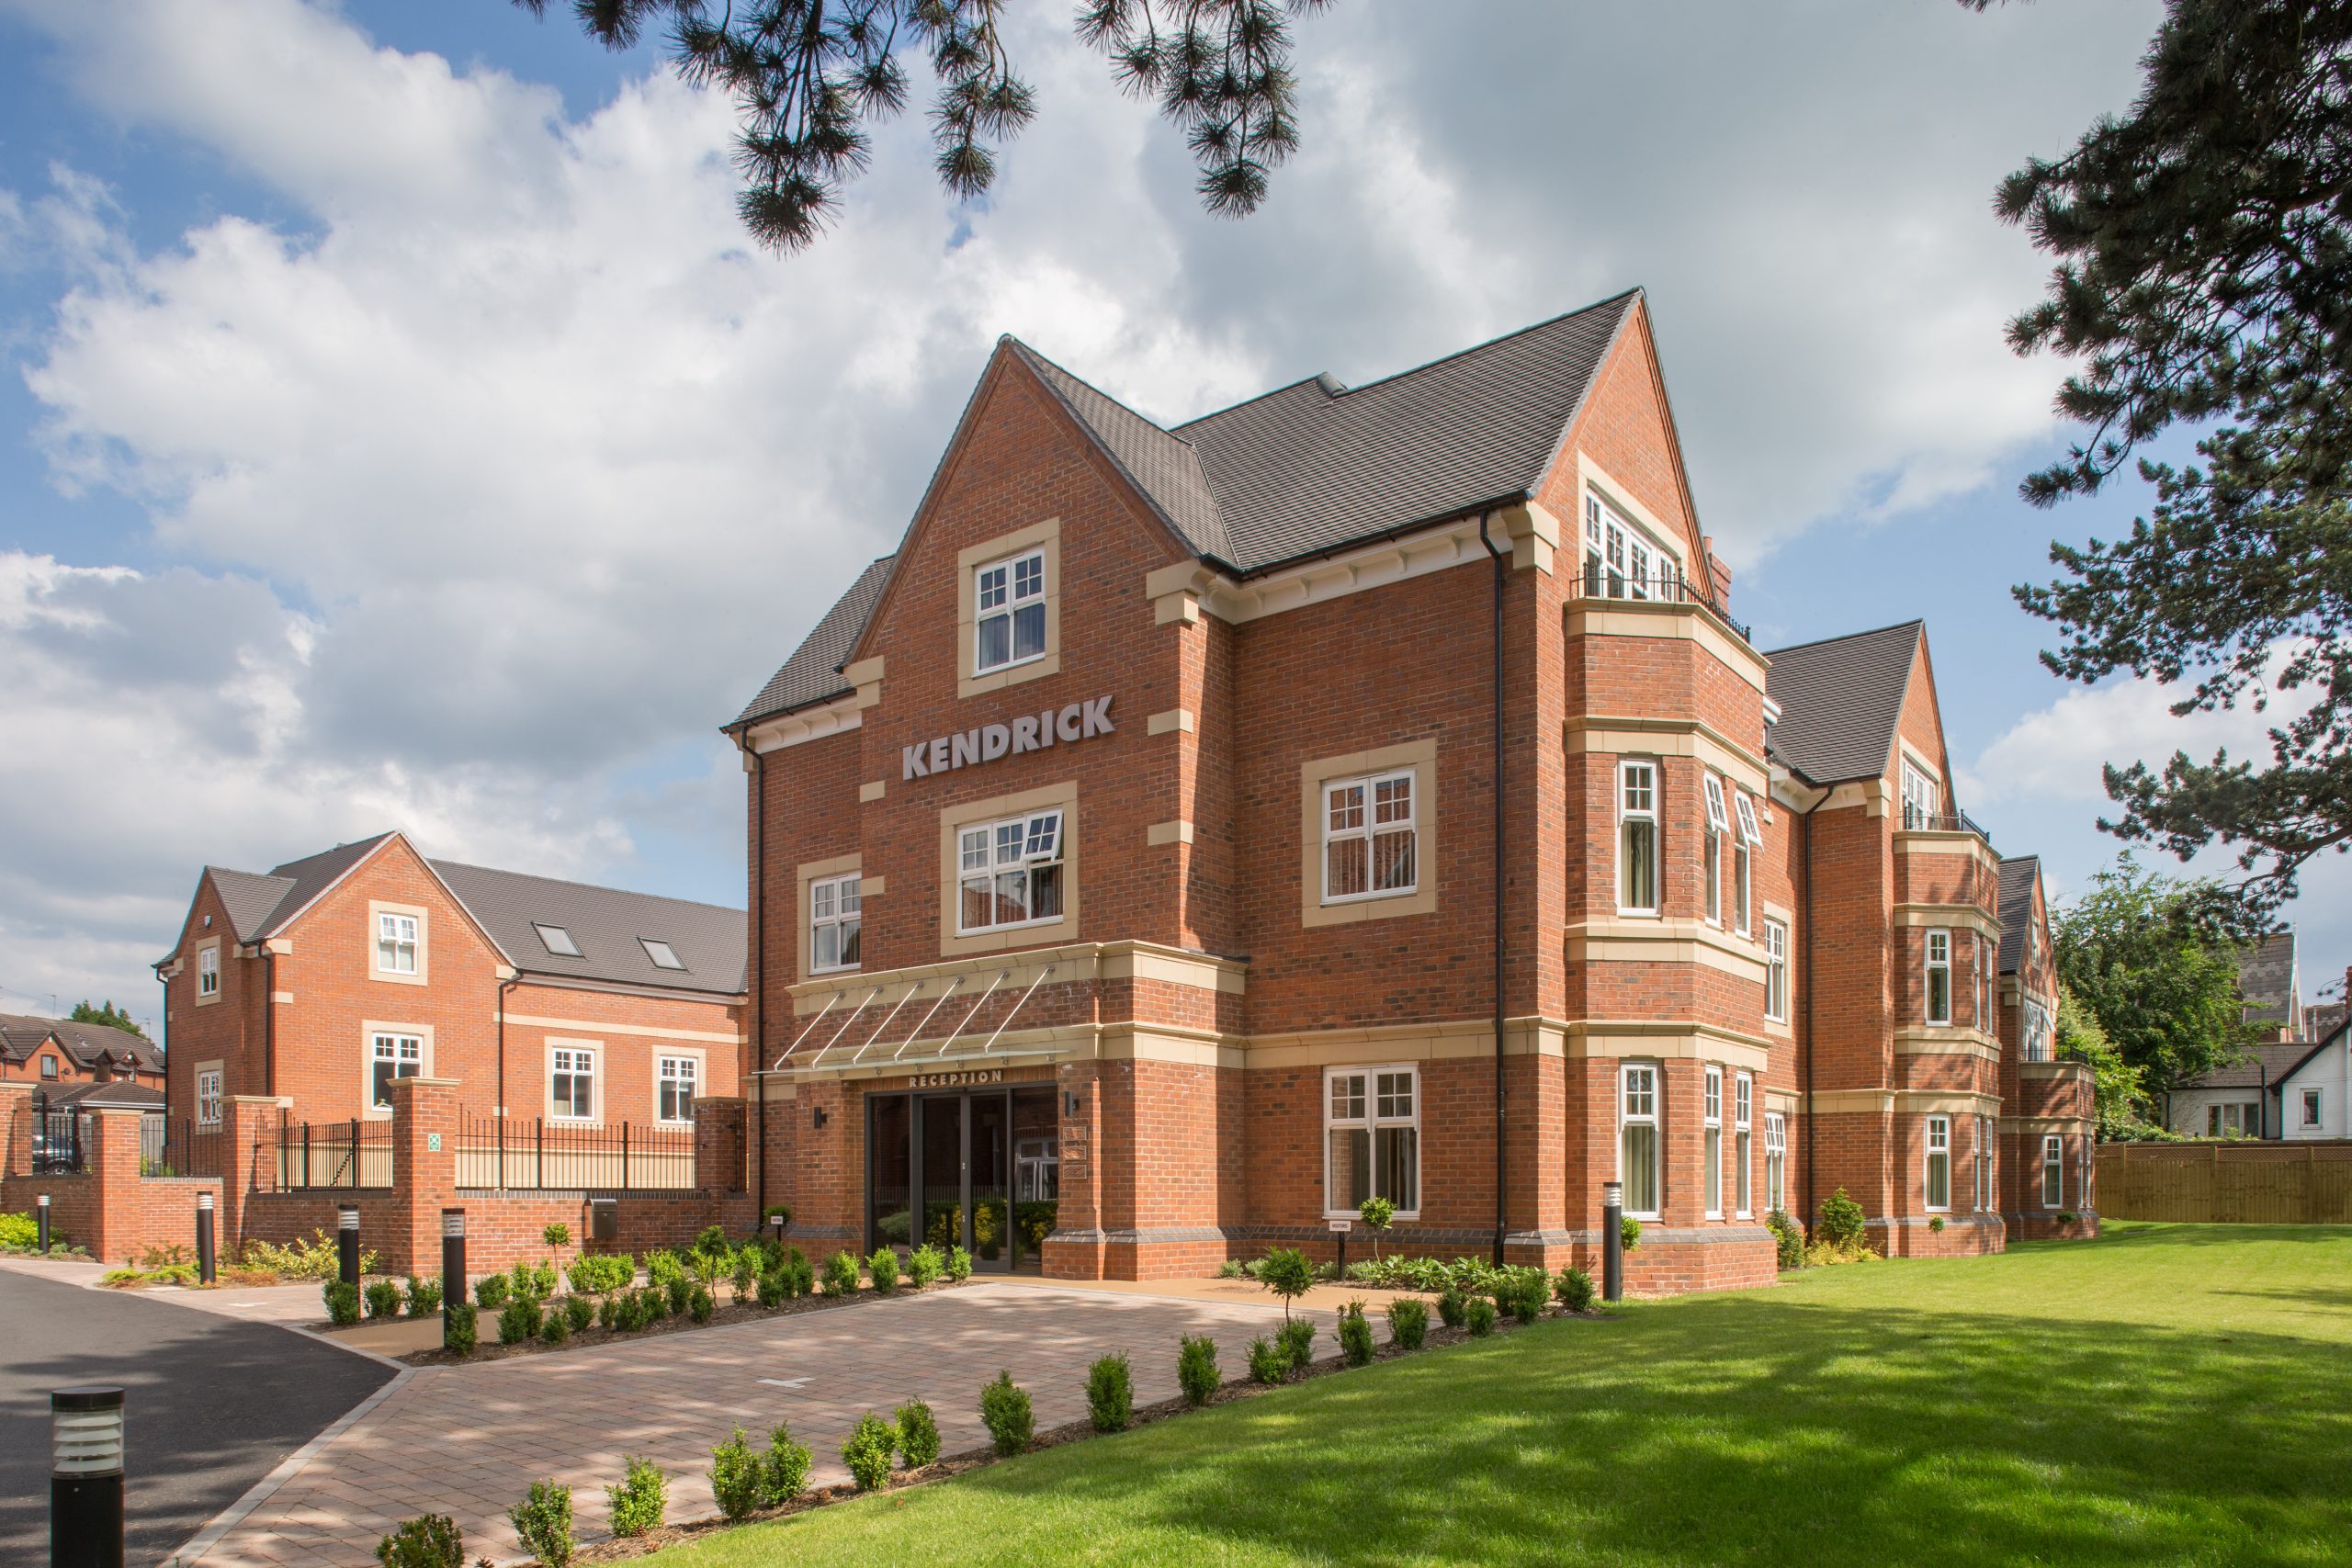 Kendrick Homes - homes in the west midlands and beyond